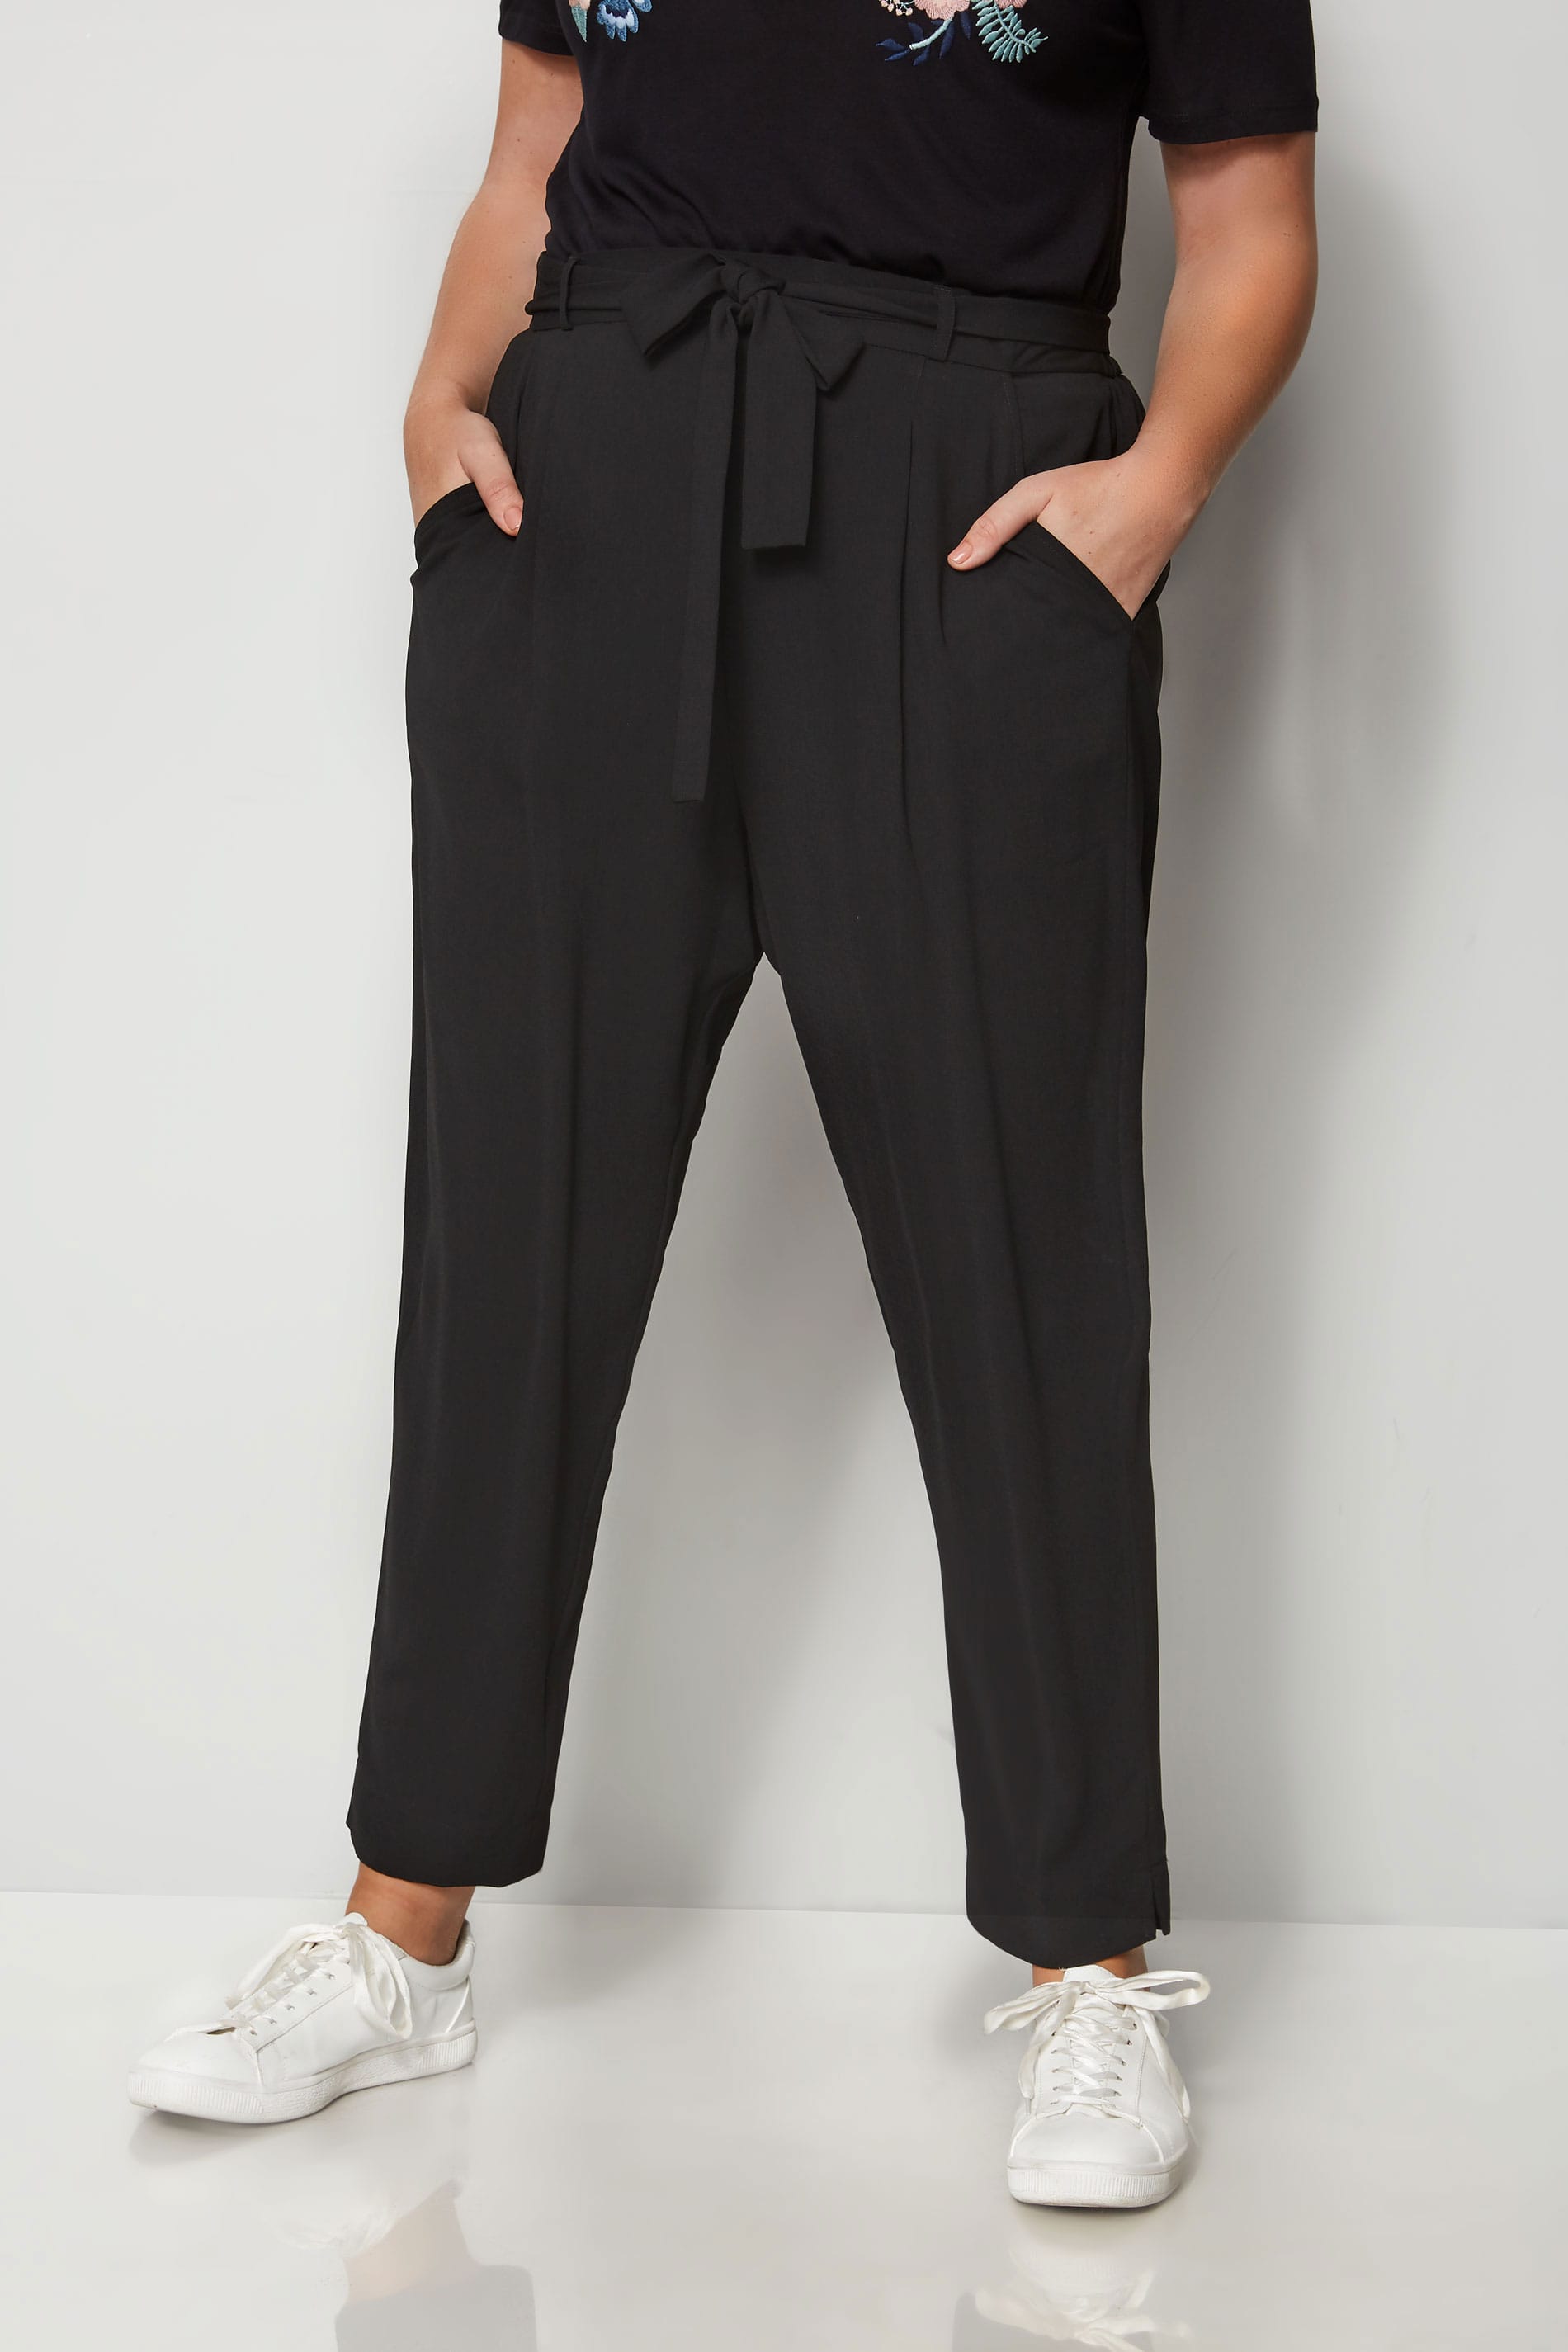 Black Crepe Tapered Trousers, plus size 16 to 36